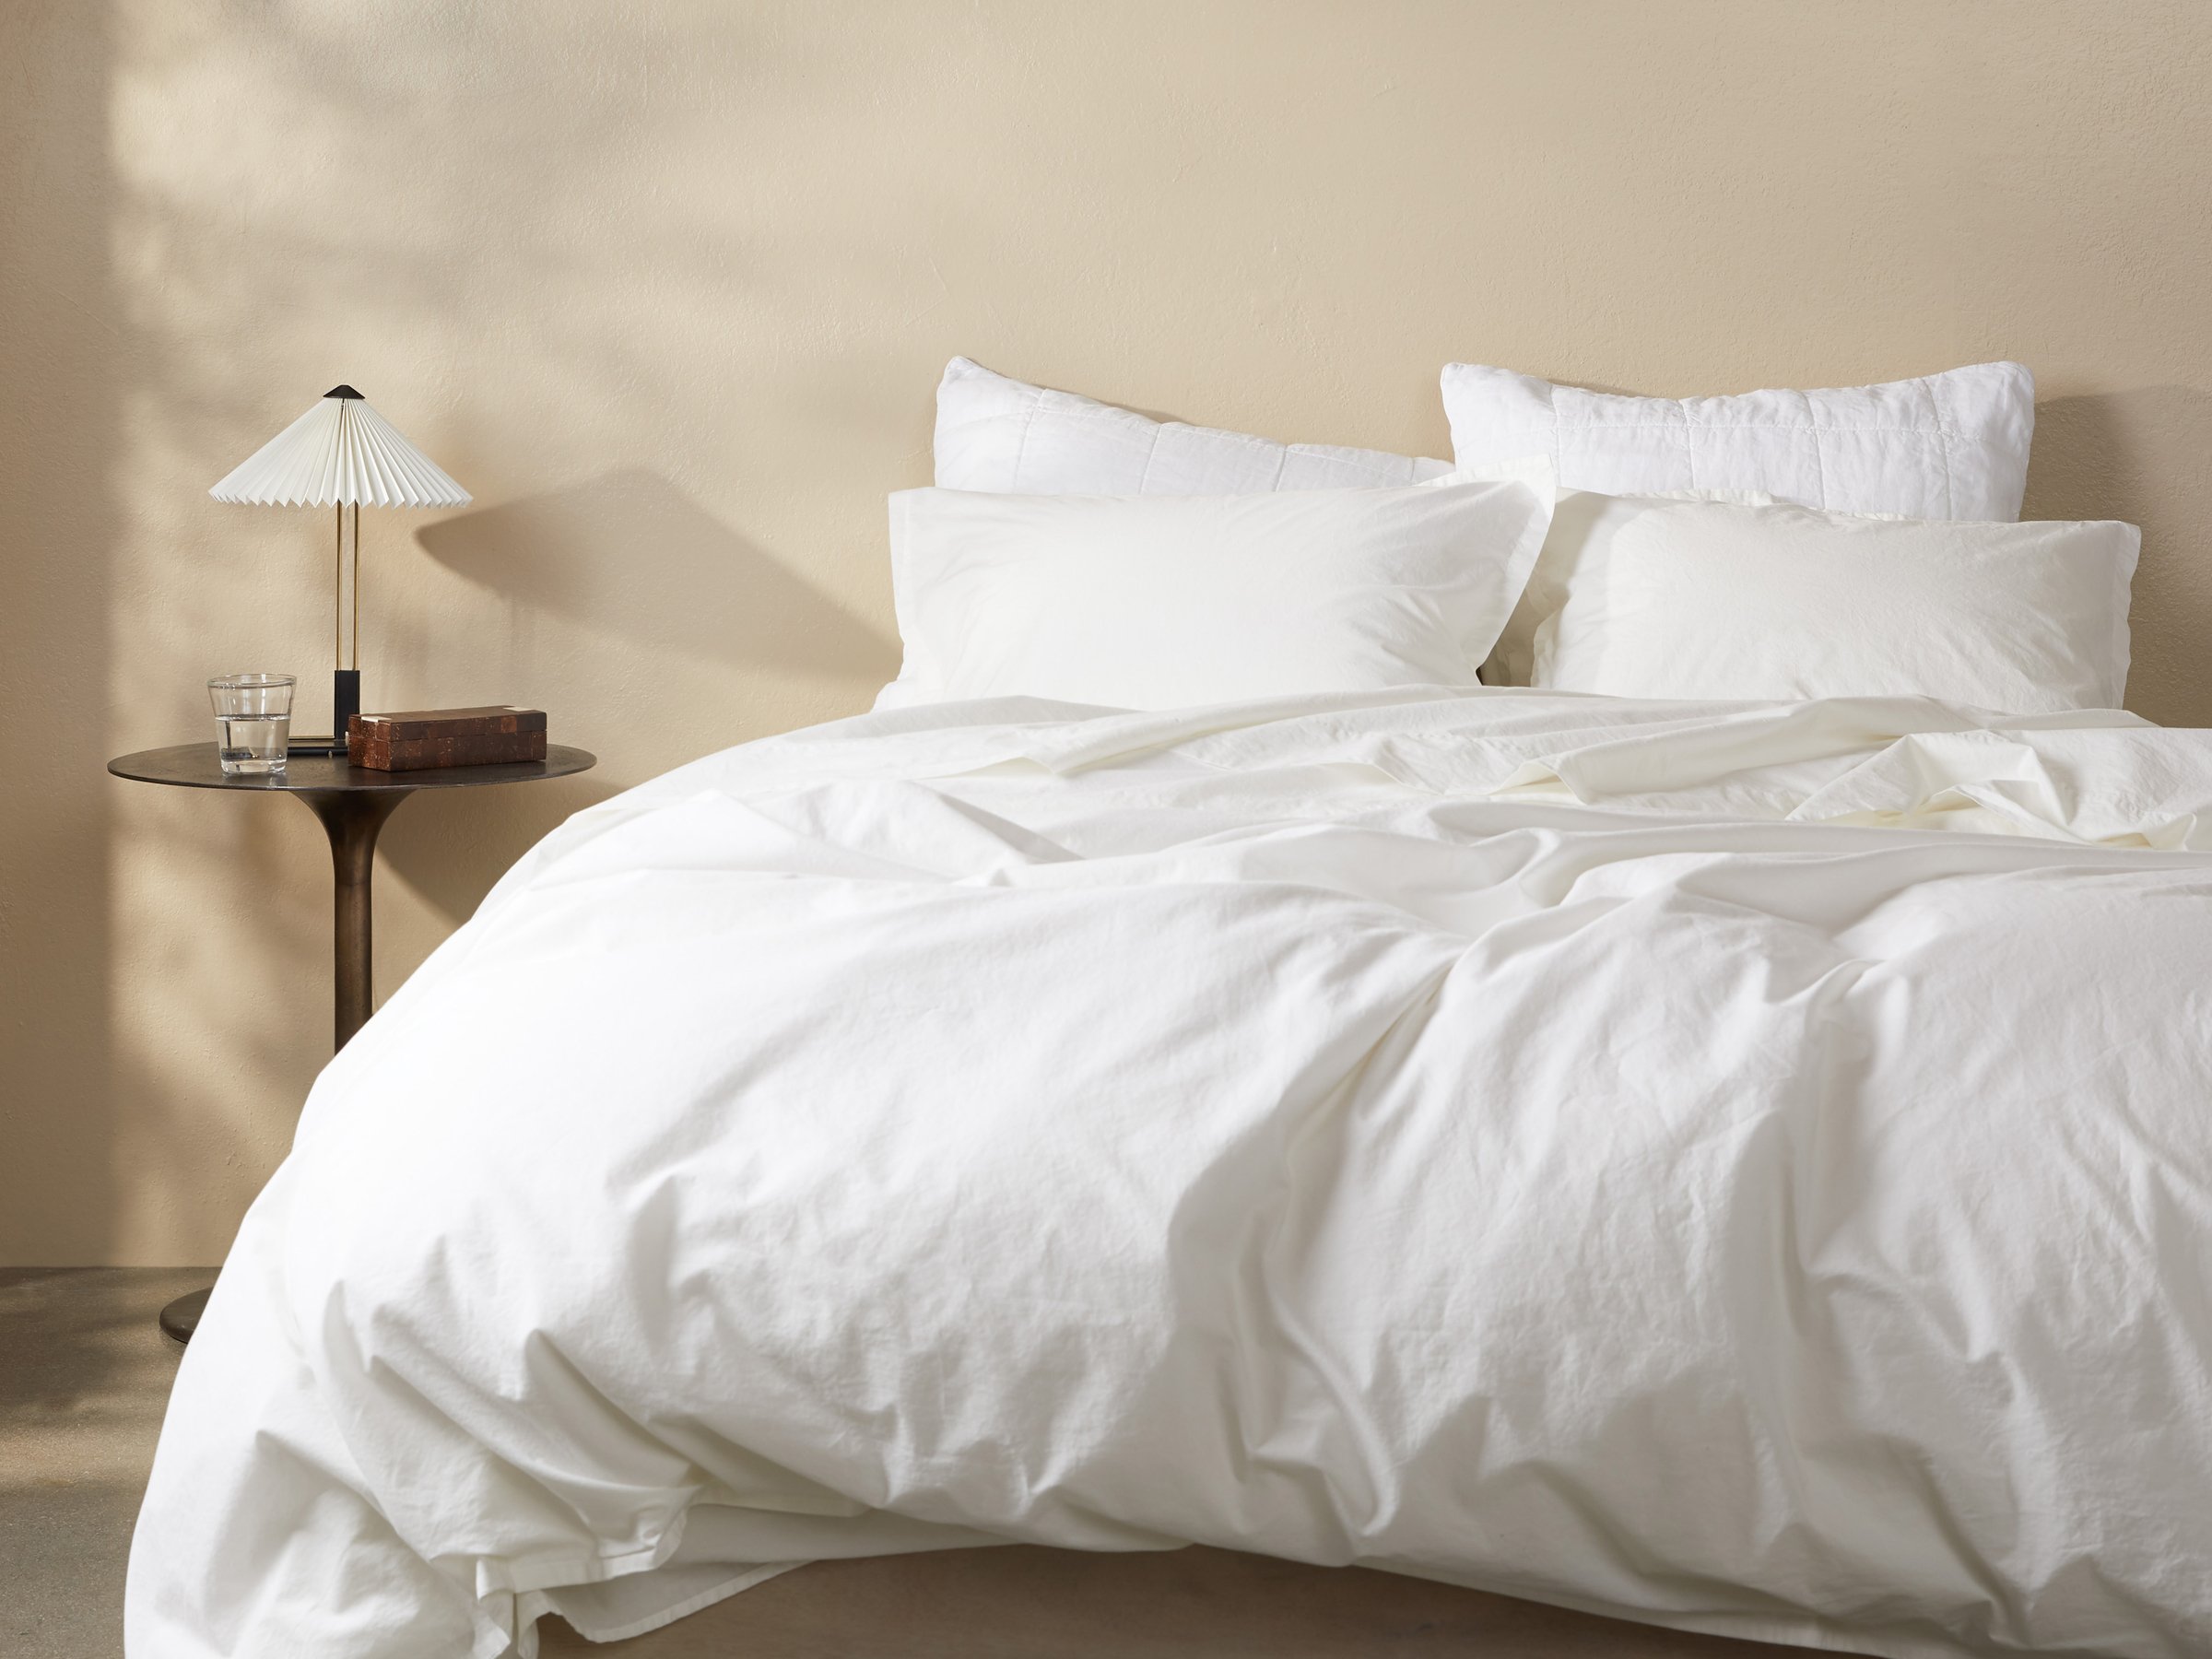 Percale Duvet Cover Parachute, Are Queen And Full Duvet Covers The Same Size